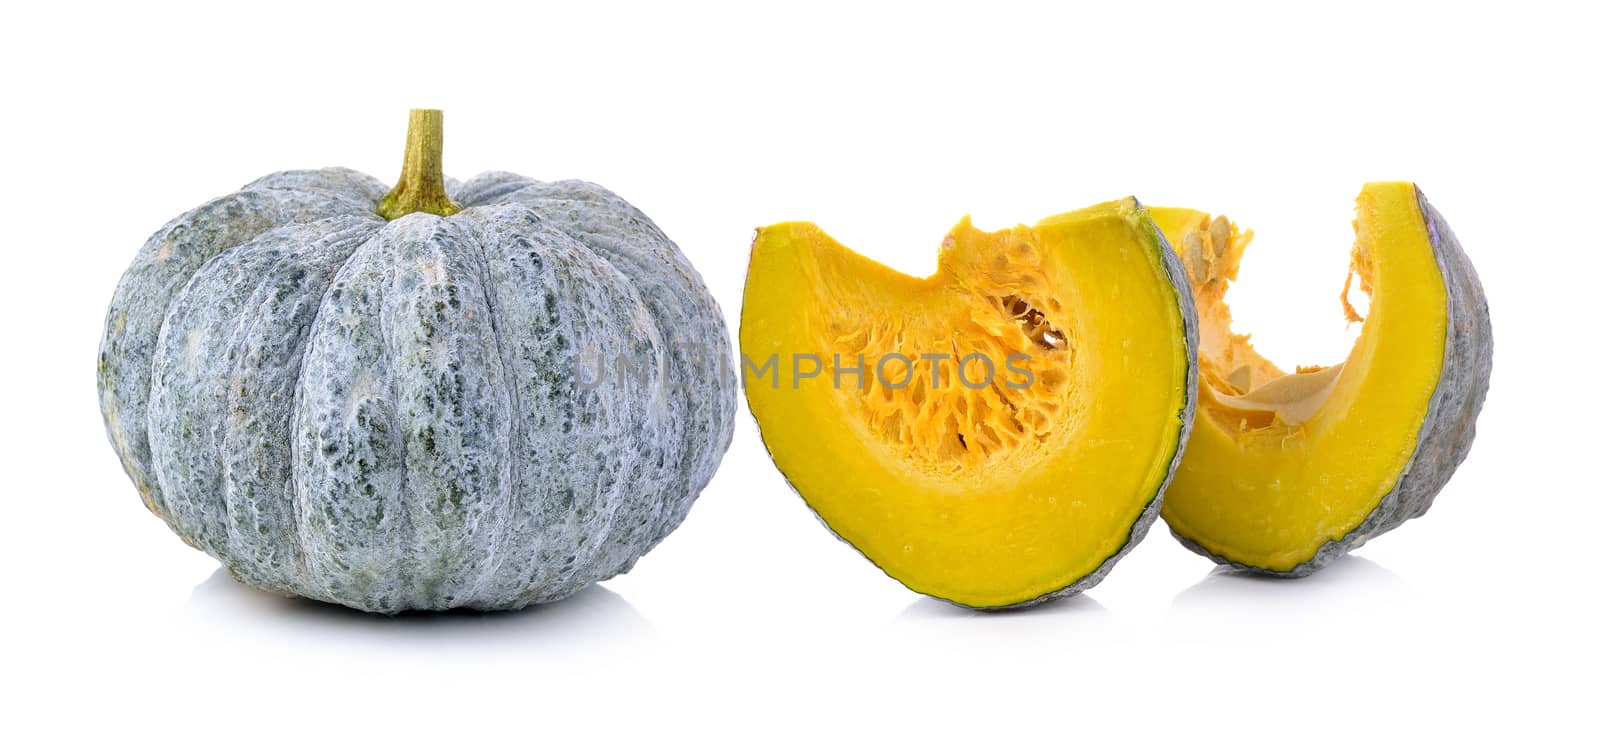 Green pumpkin isolated on the white background